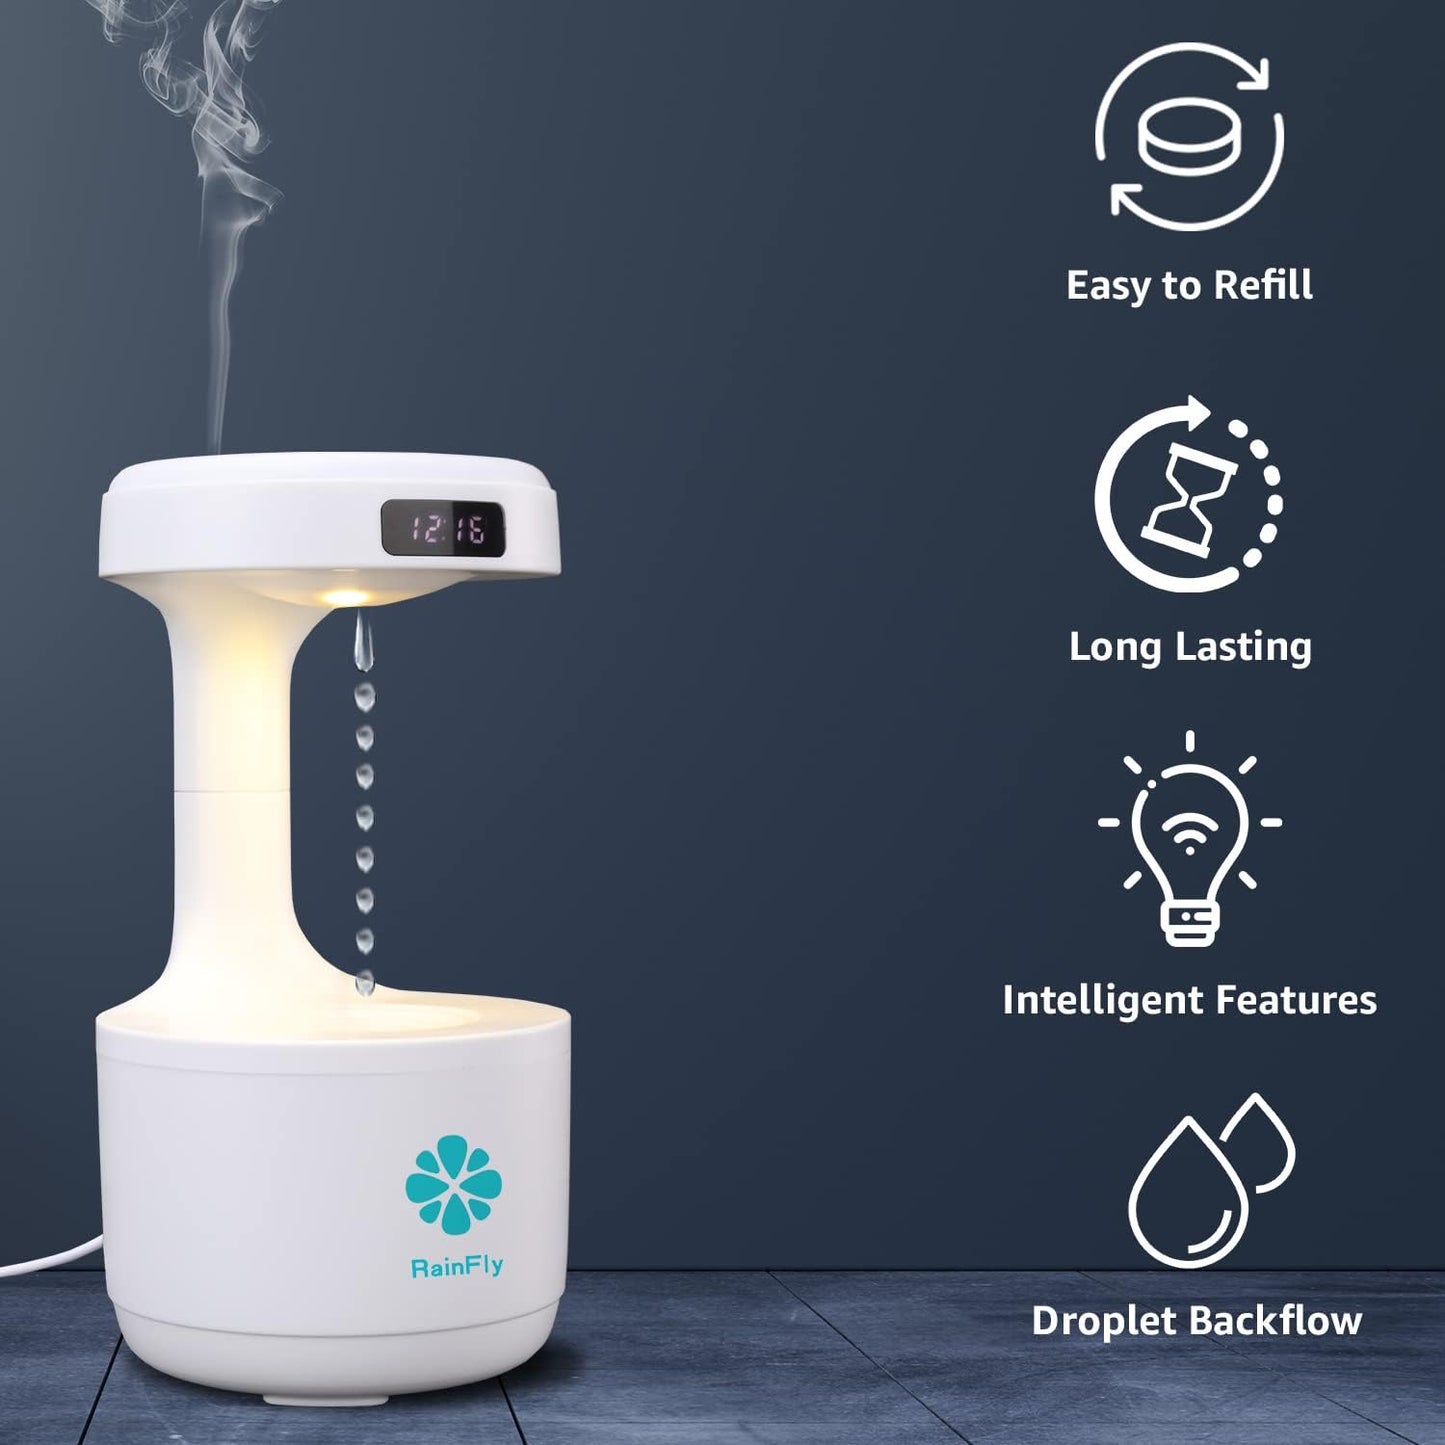 HUMIDIFIER FOR BEDROOM, CUTE HUMIDIFIER WITH ANTI-GRAVITY HUMIDIFIER, CHARGER INCLUDED, CHARGE ON 5V/2A OR GREATER WATTS SPORTED, 800ML WATER TANK (WHITE)